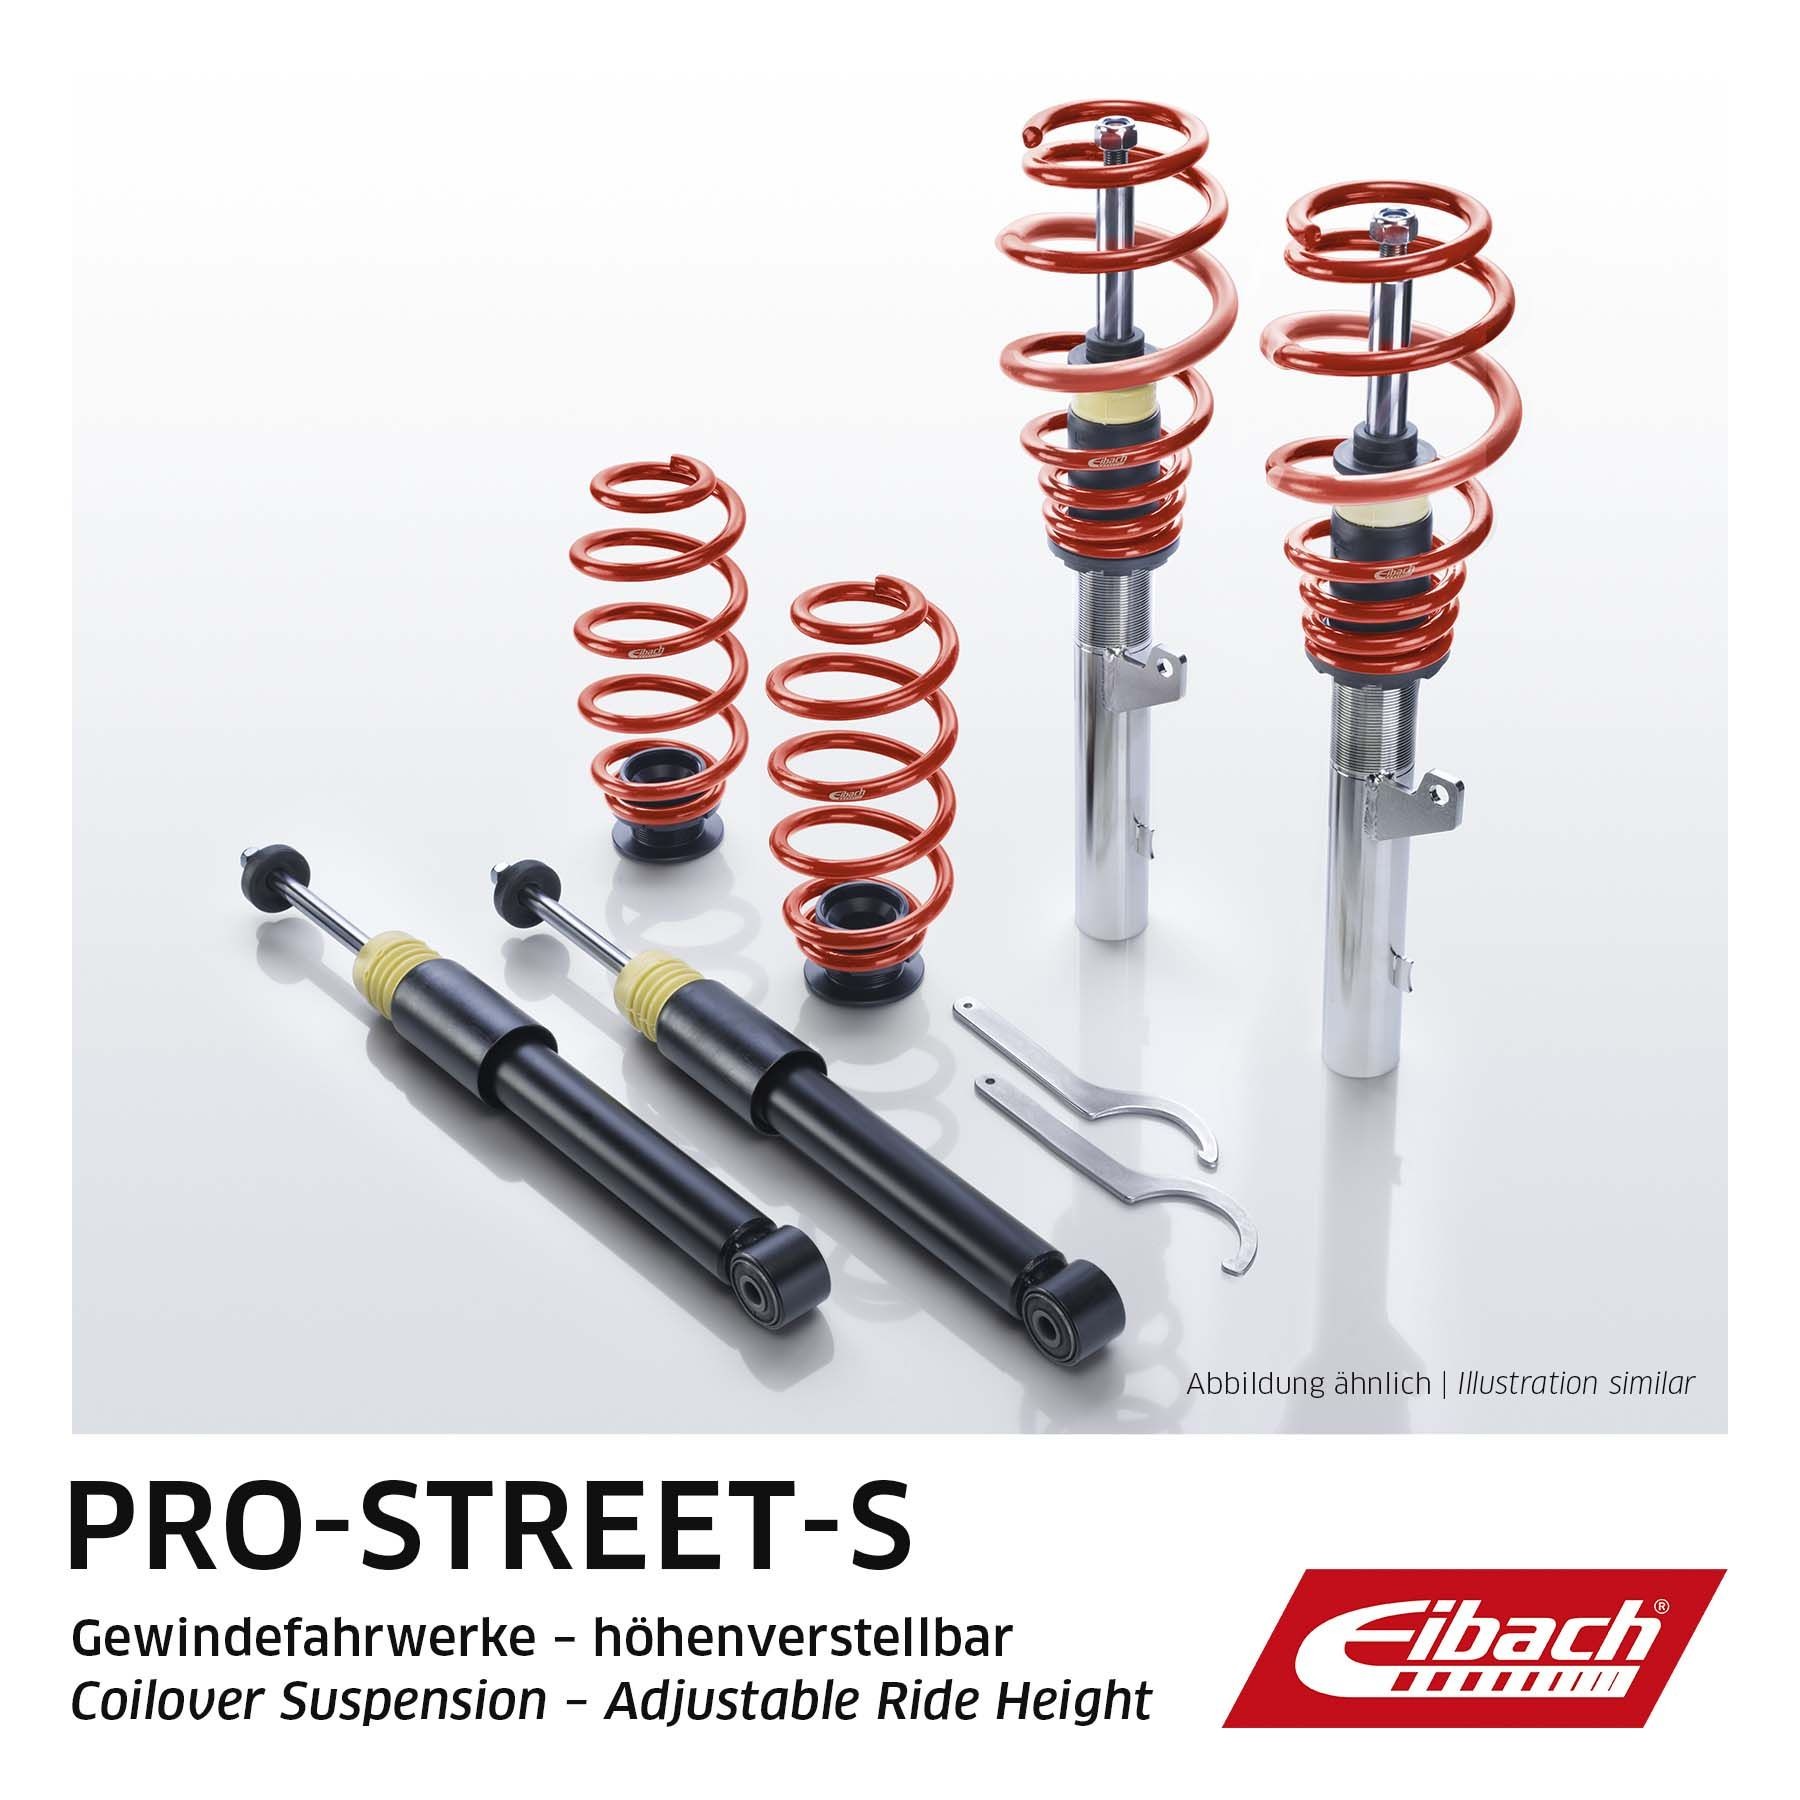 65200110122 EIBACH Pro-Street-S PSS65200110122 Suspension kit, coil springs / shock absorbers BMW E60 530 i 258 hp Petrol 2007 price